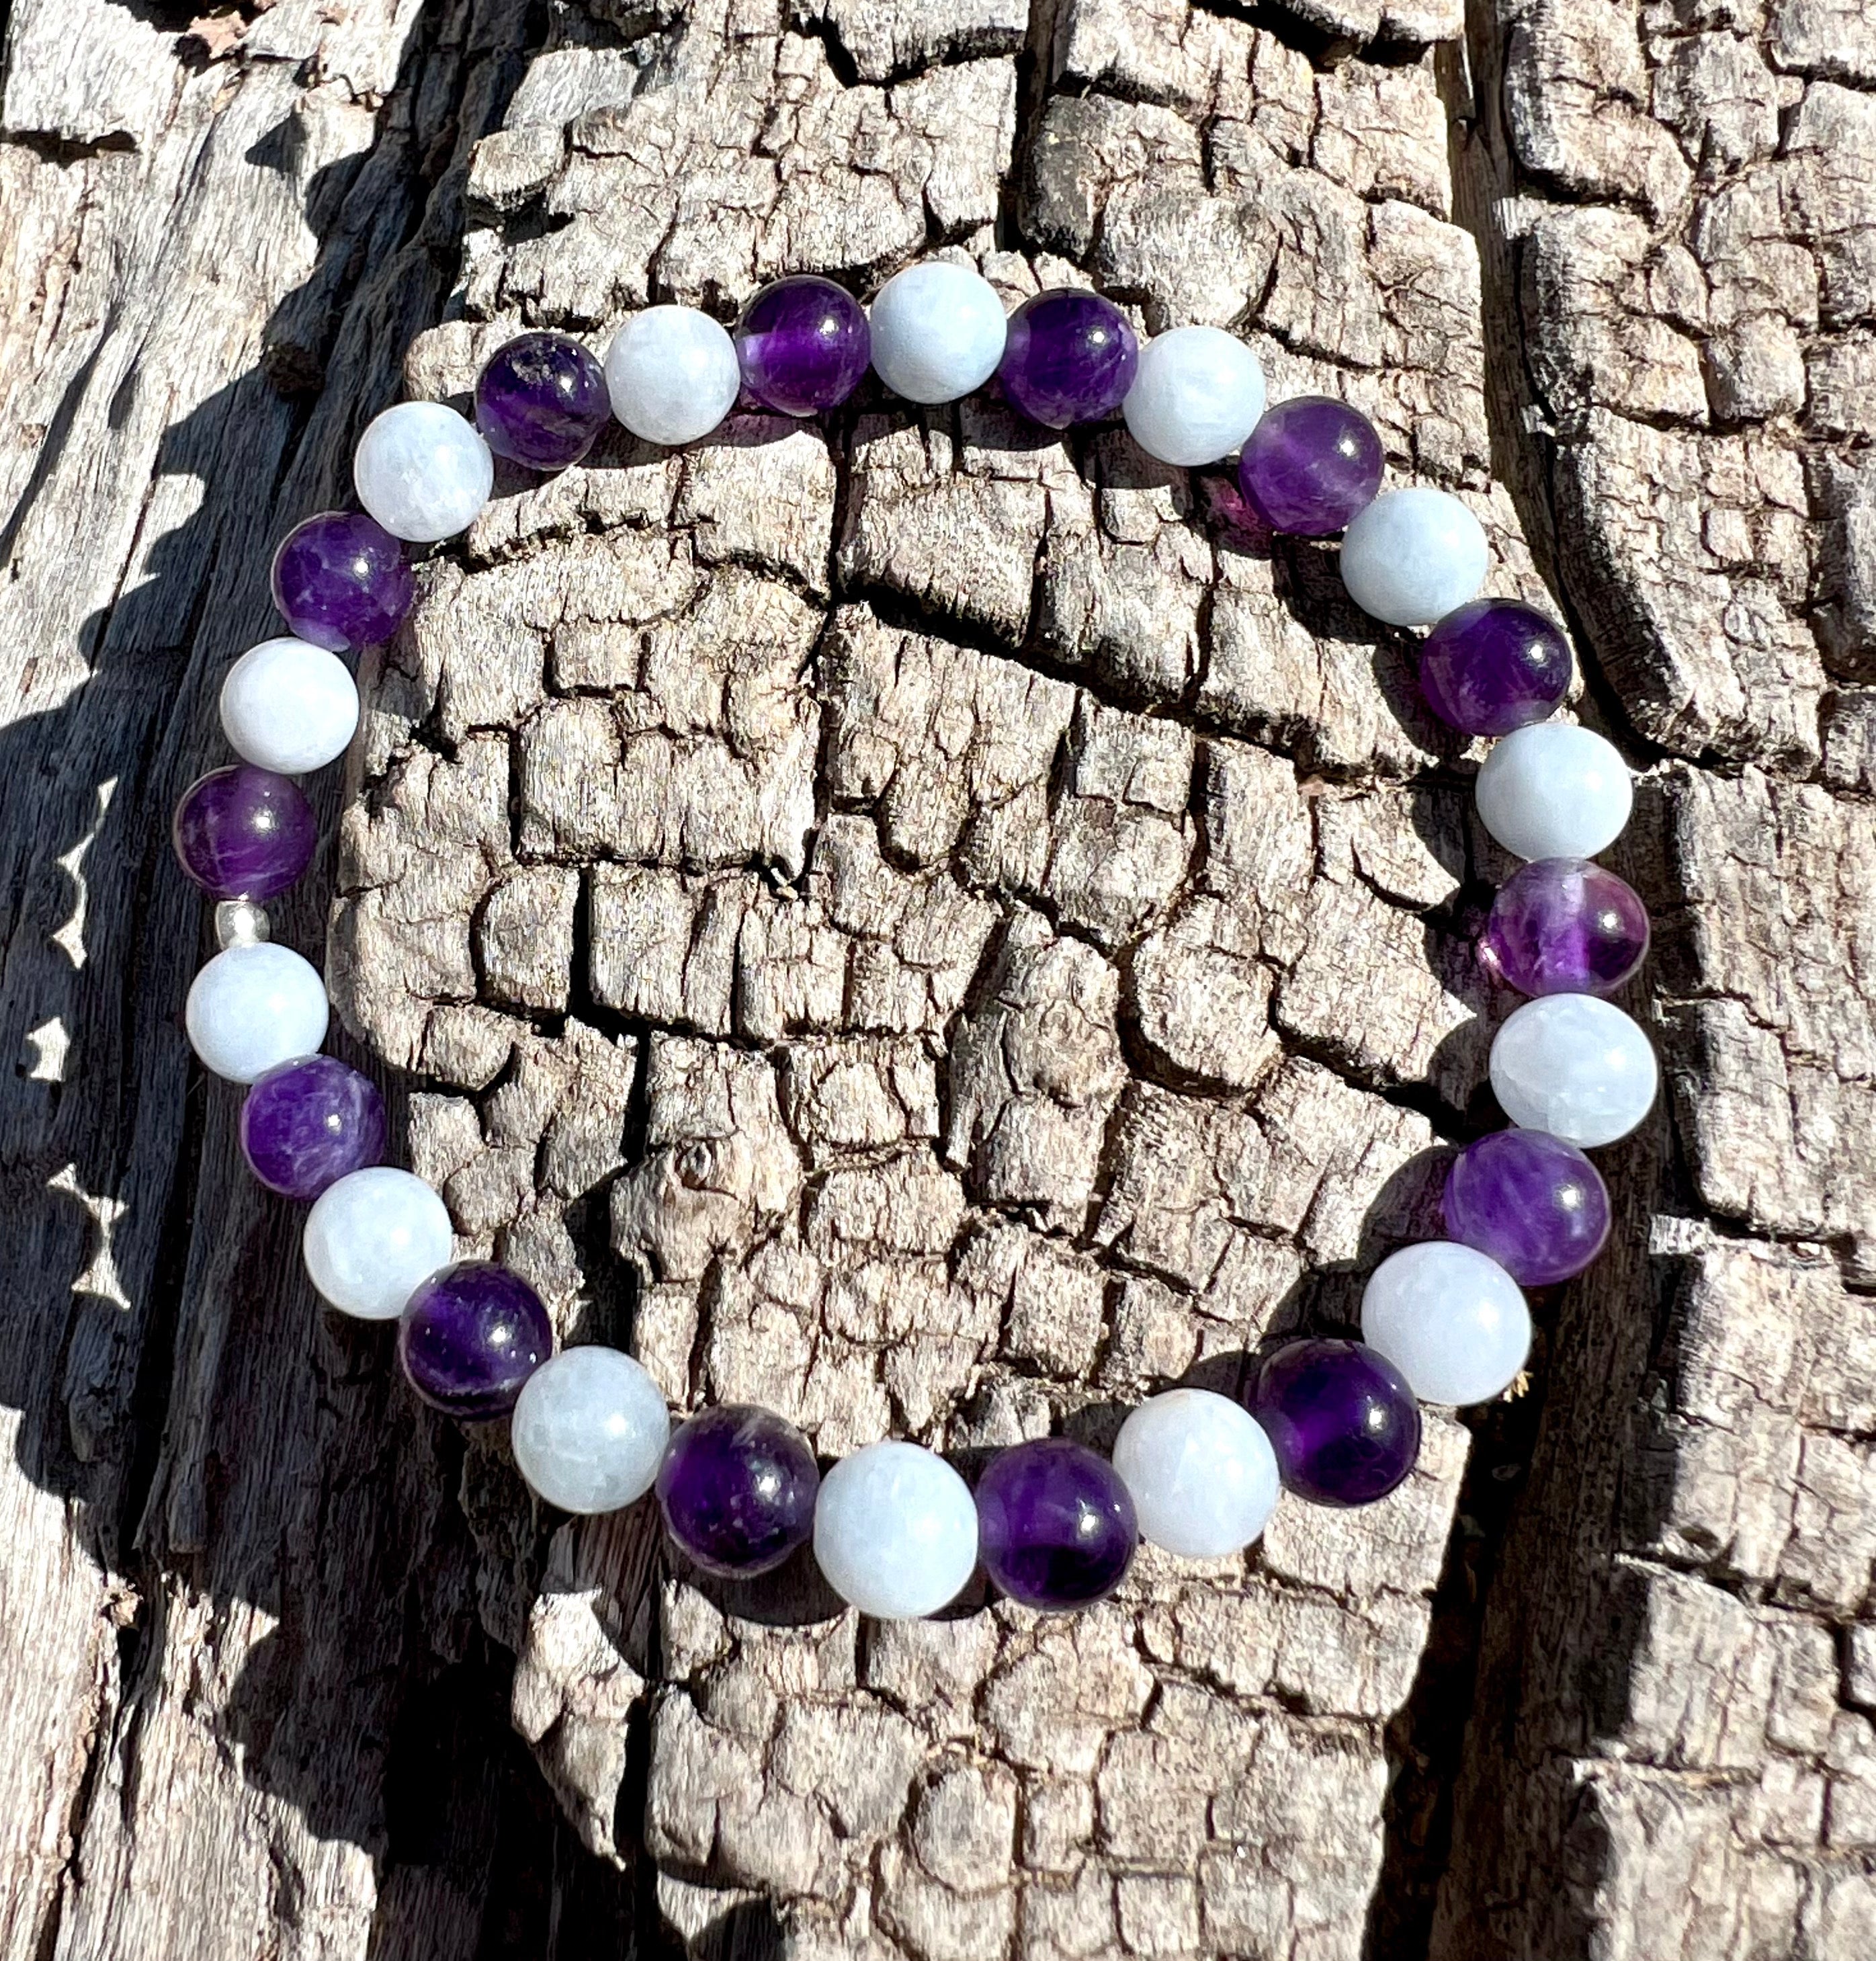 One Day at a Time - Inspirational Amethyst Wrap Bracelet.